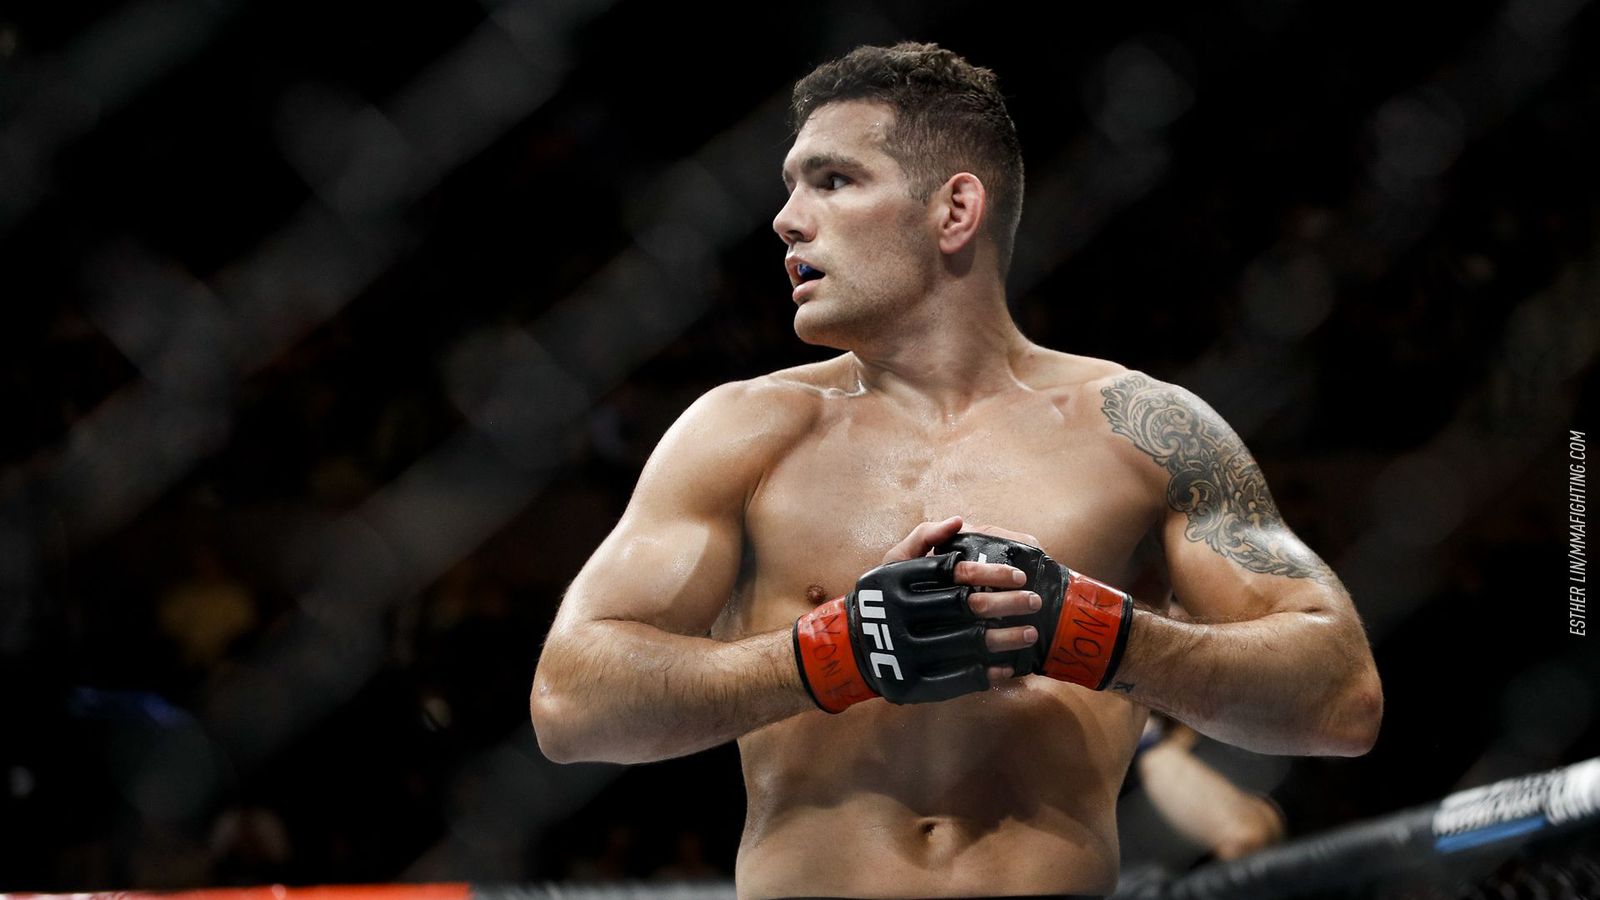 Chris Weidman is confident he will be back in the Octagon after breaking his leg at UFC 261